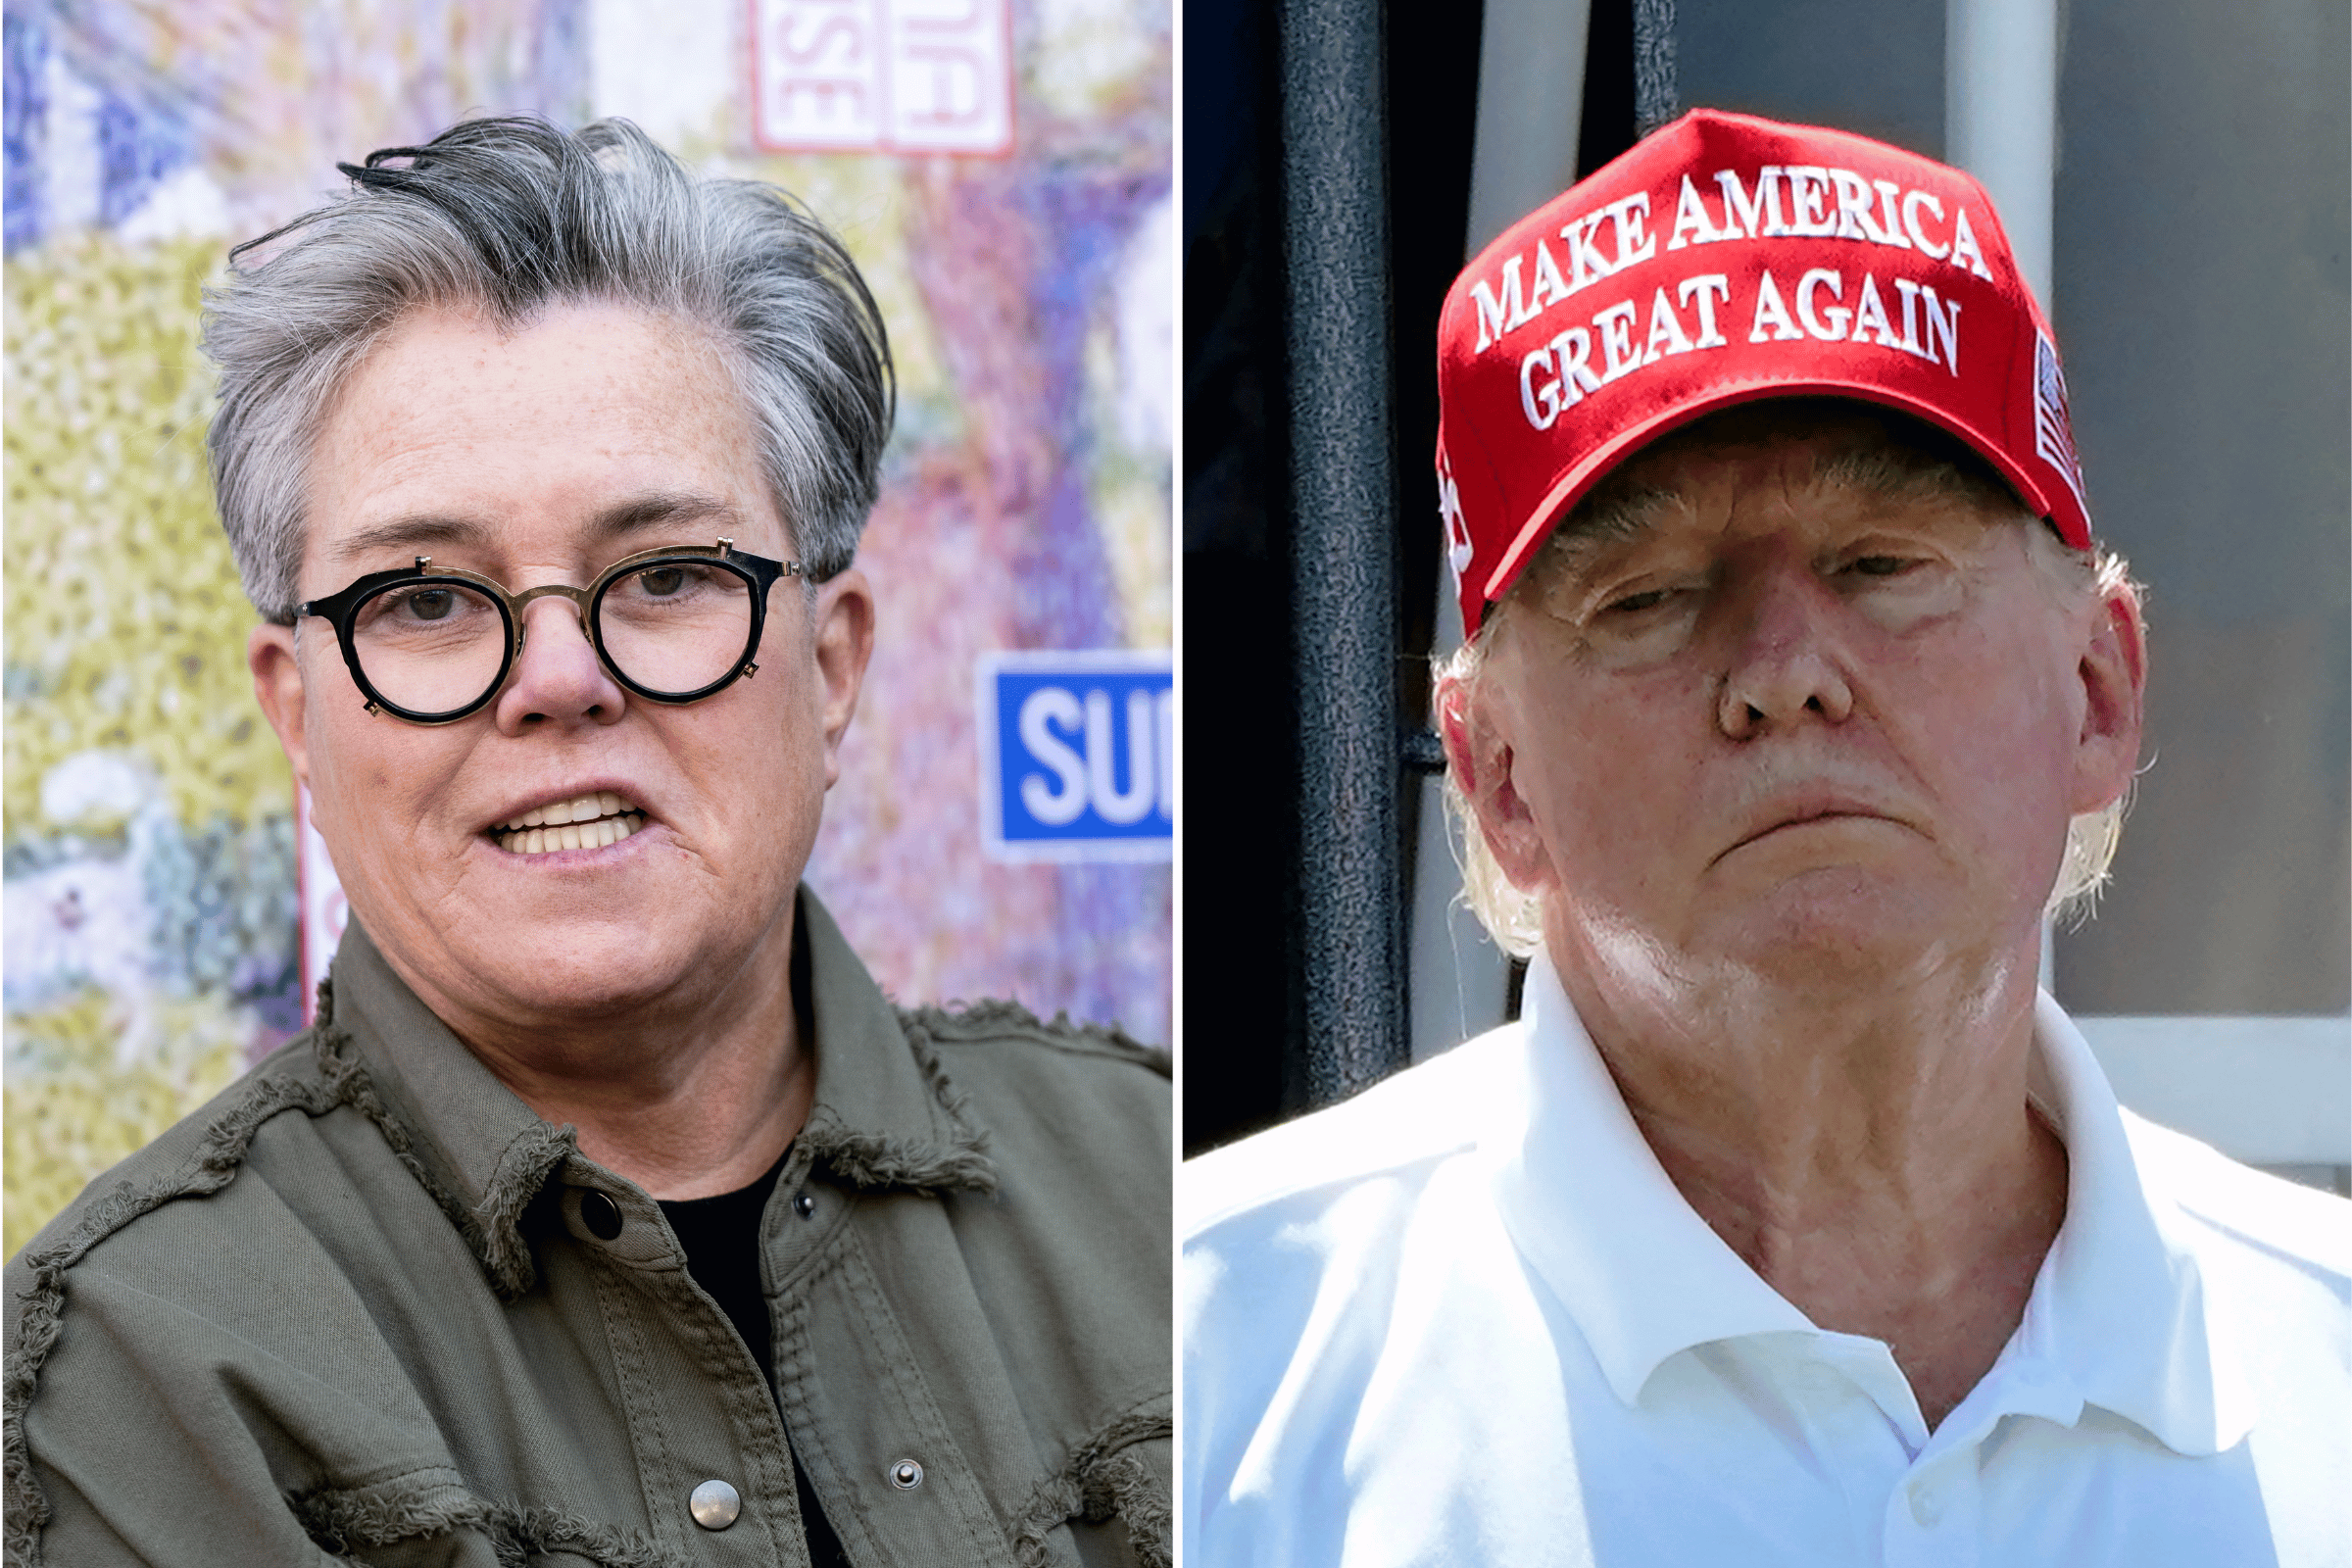 Rosie O'Donnell and Donald Trump